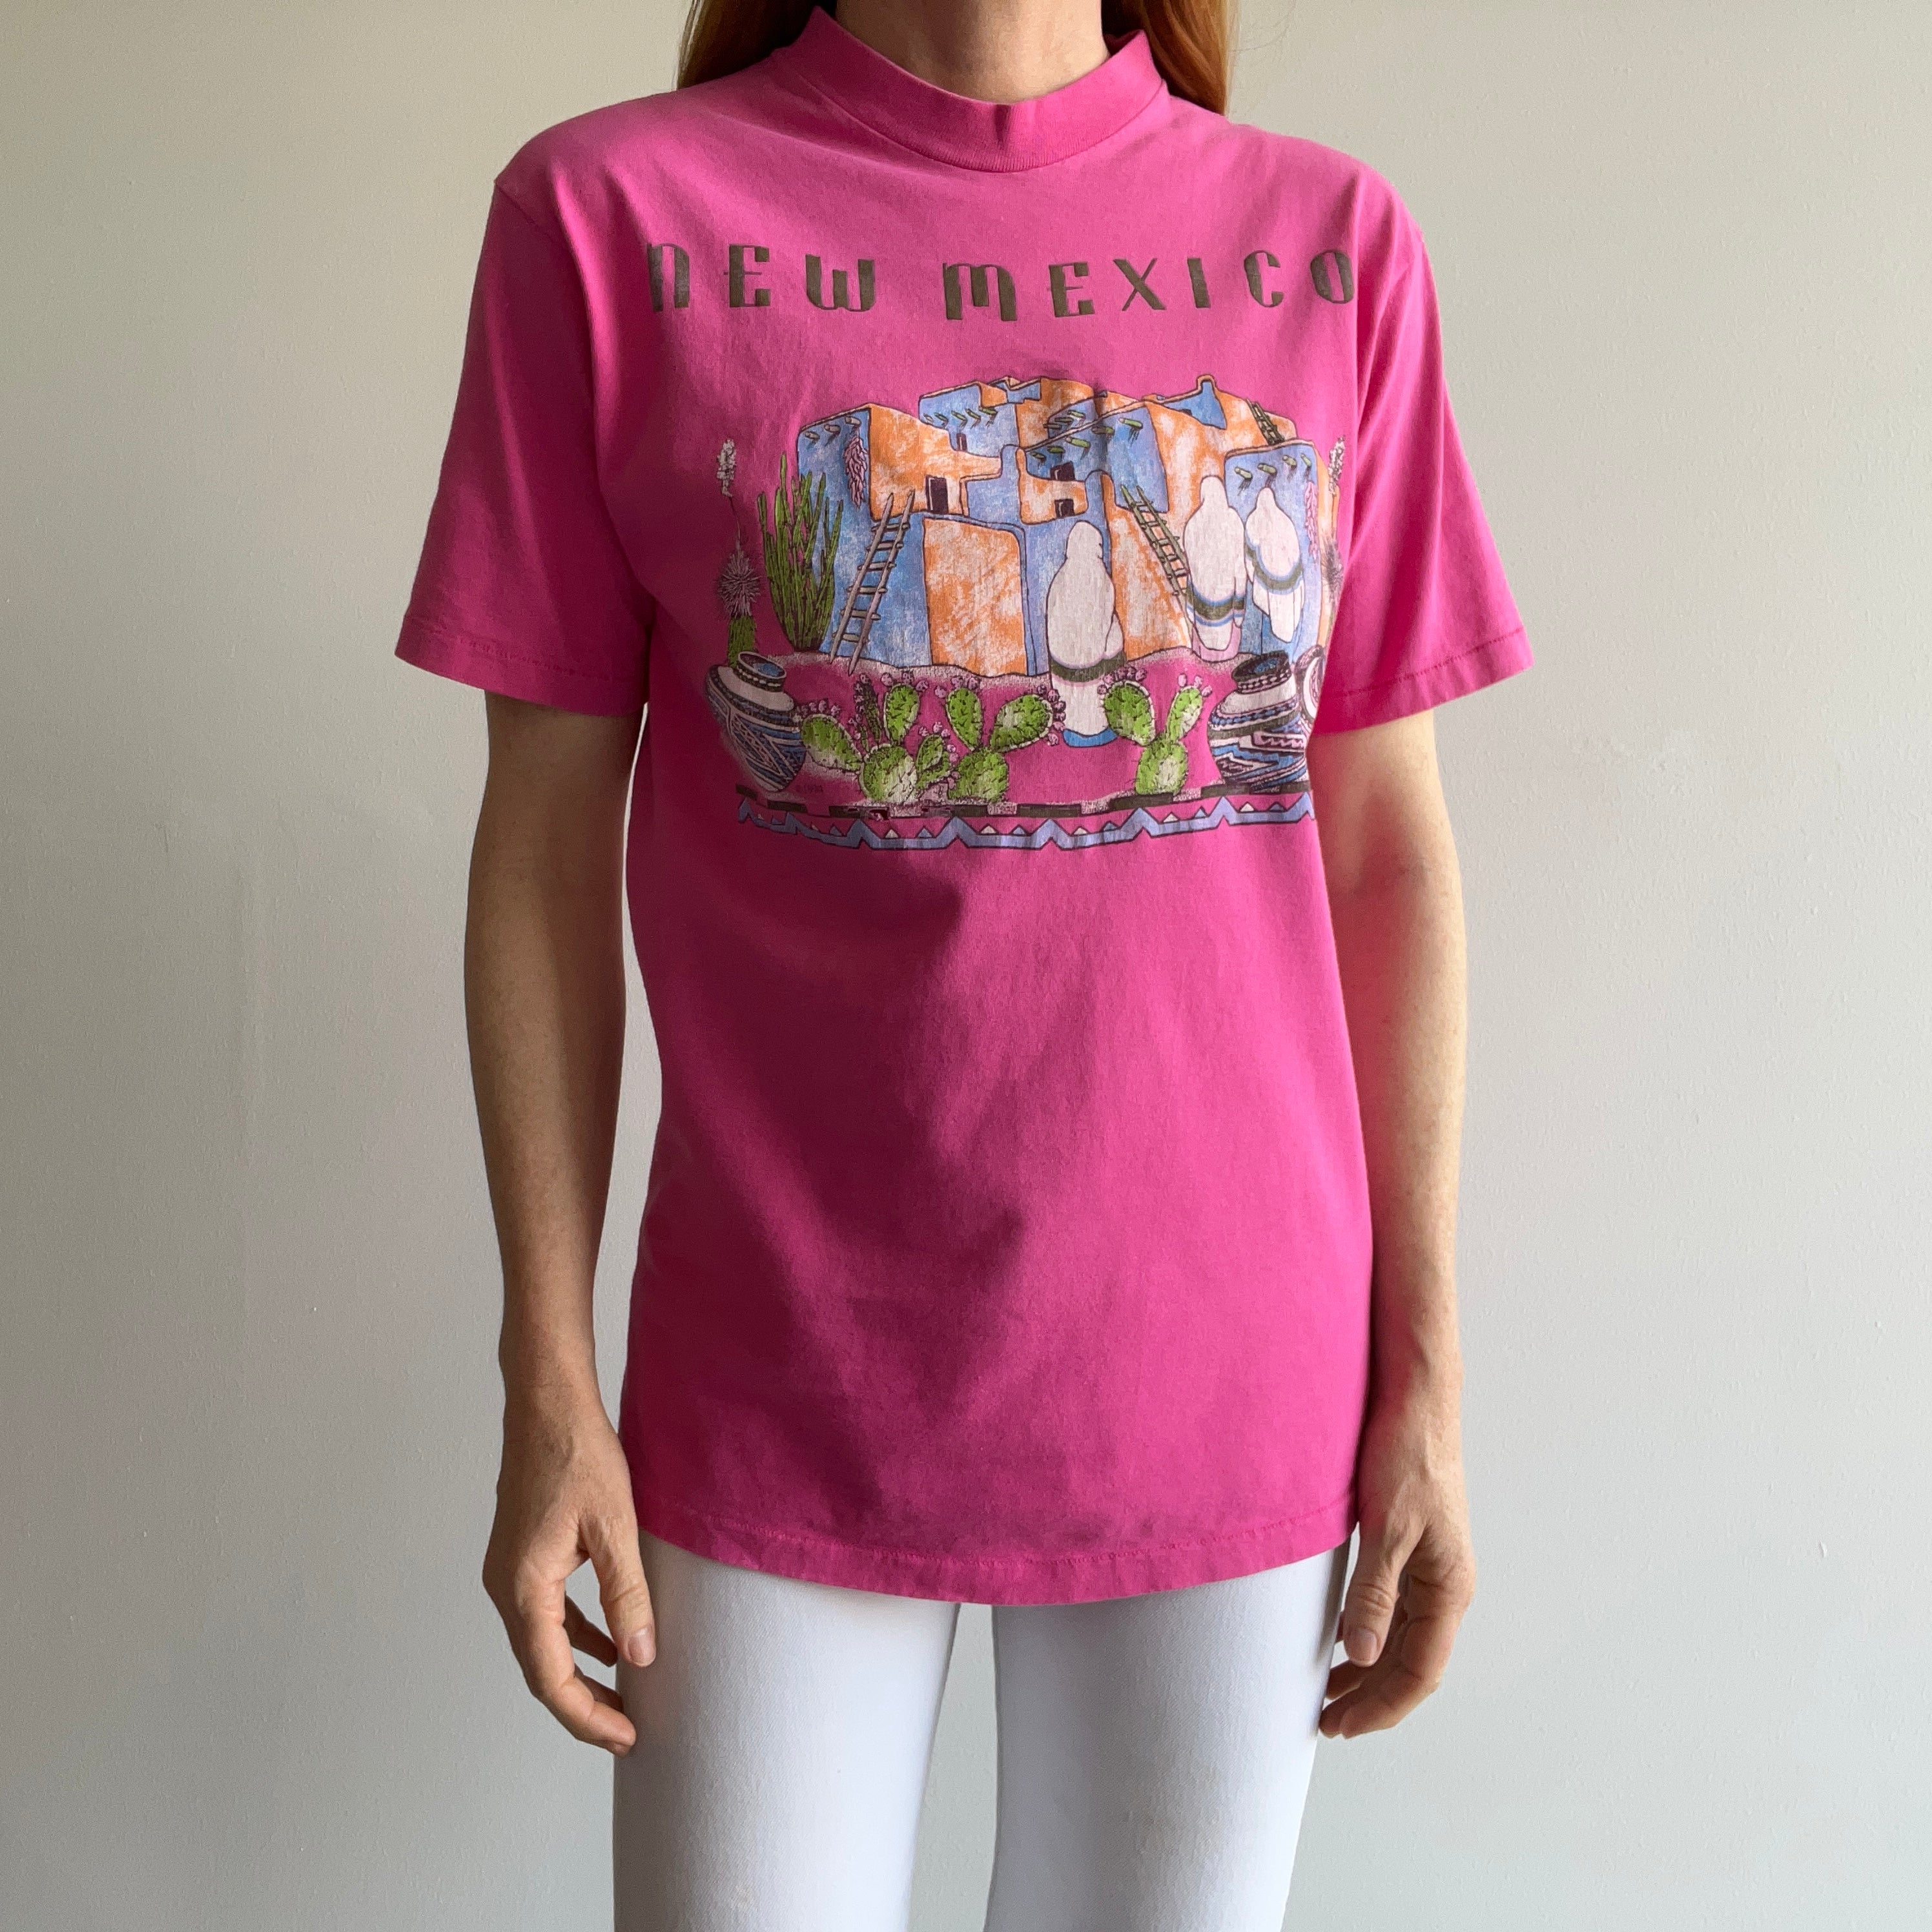 1994 New Mexico Cotton T-Shirt by Anvil (Higher Crew)